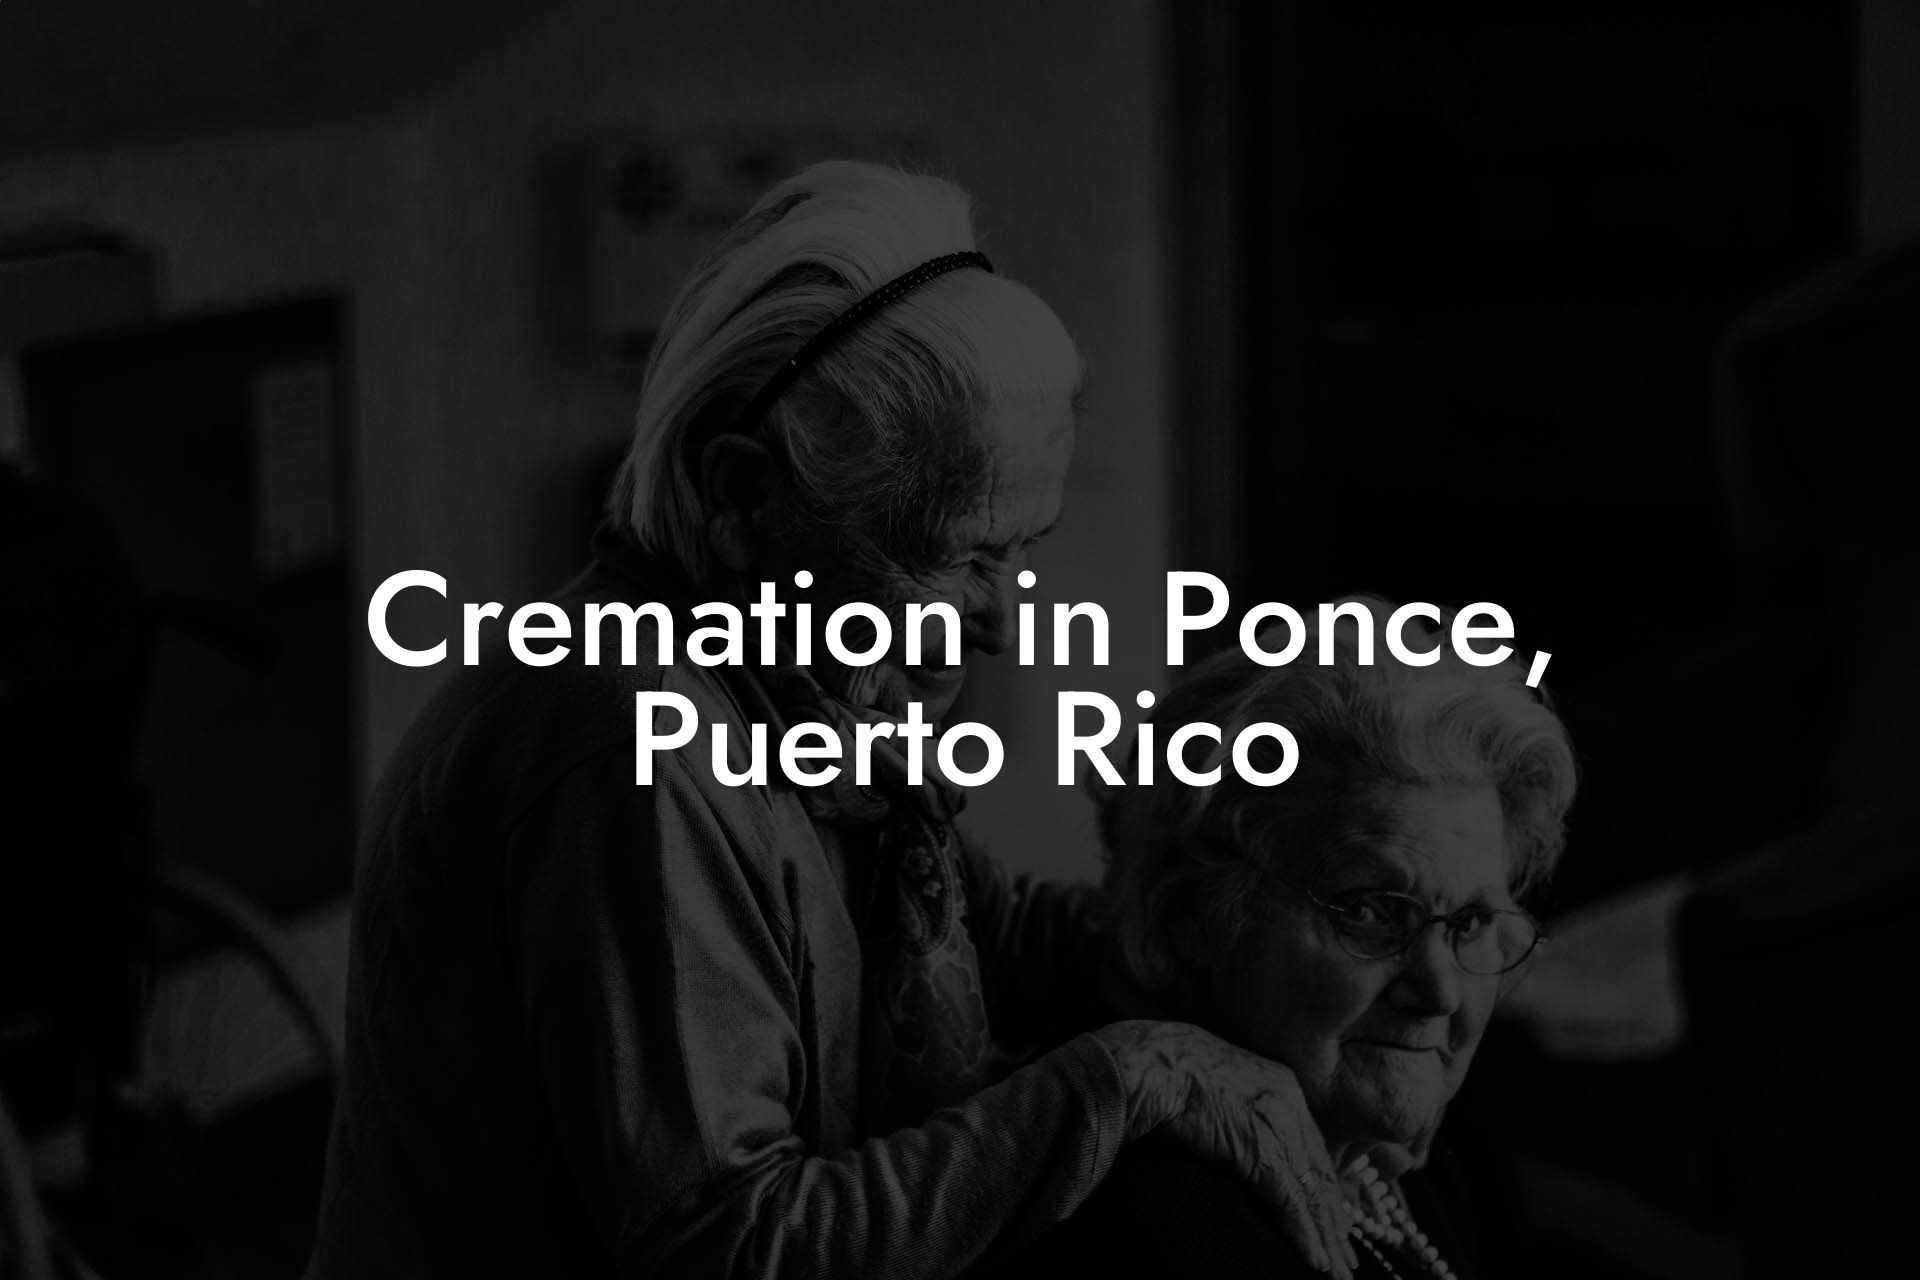 Cremation in Ponce, Puerto Rico